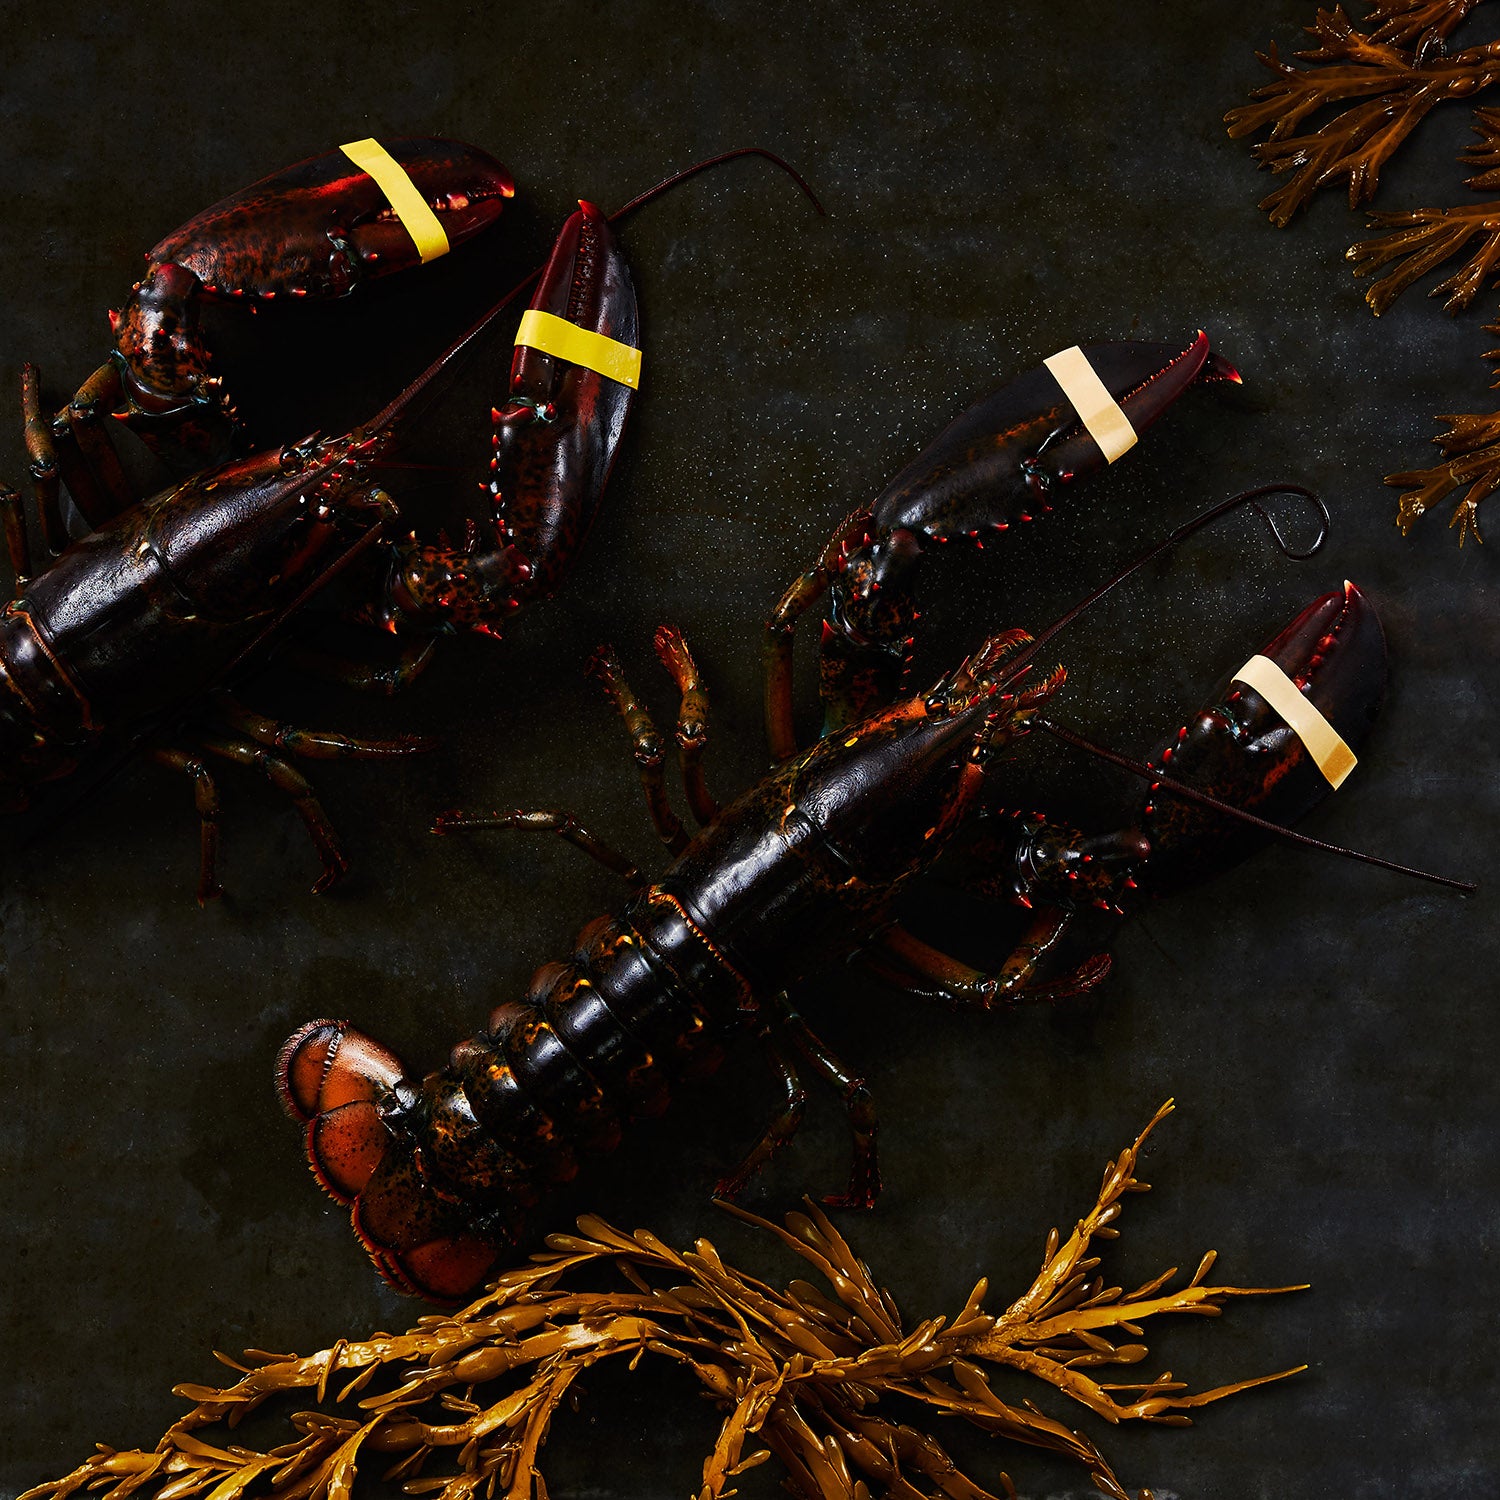 This photograph shows two live lobsters Banded, just how you will receive them when you order from cousins Maine lobster